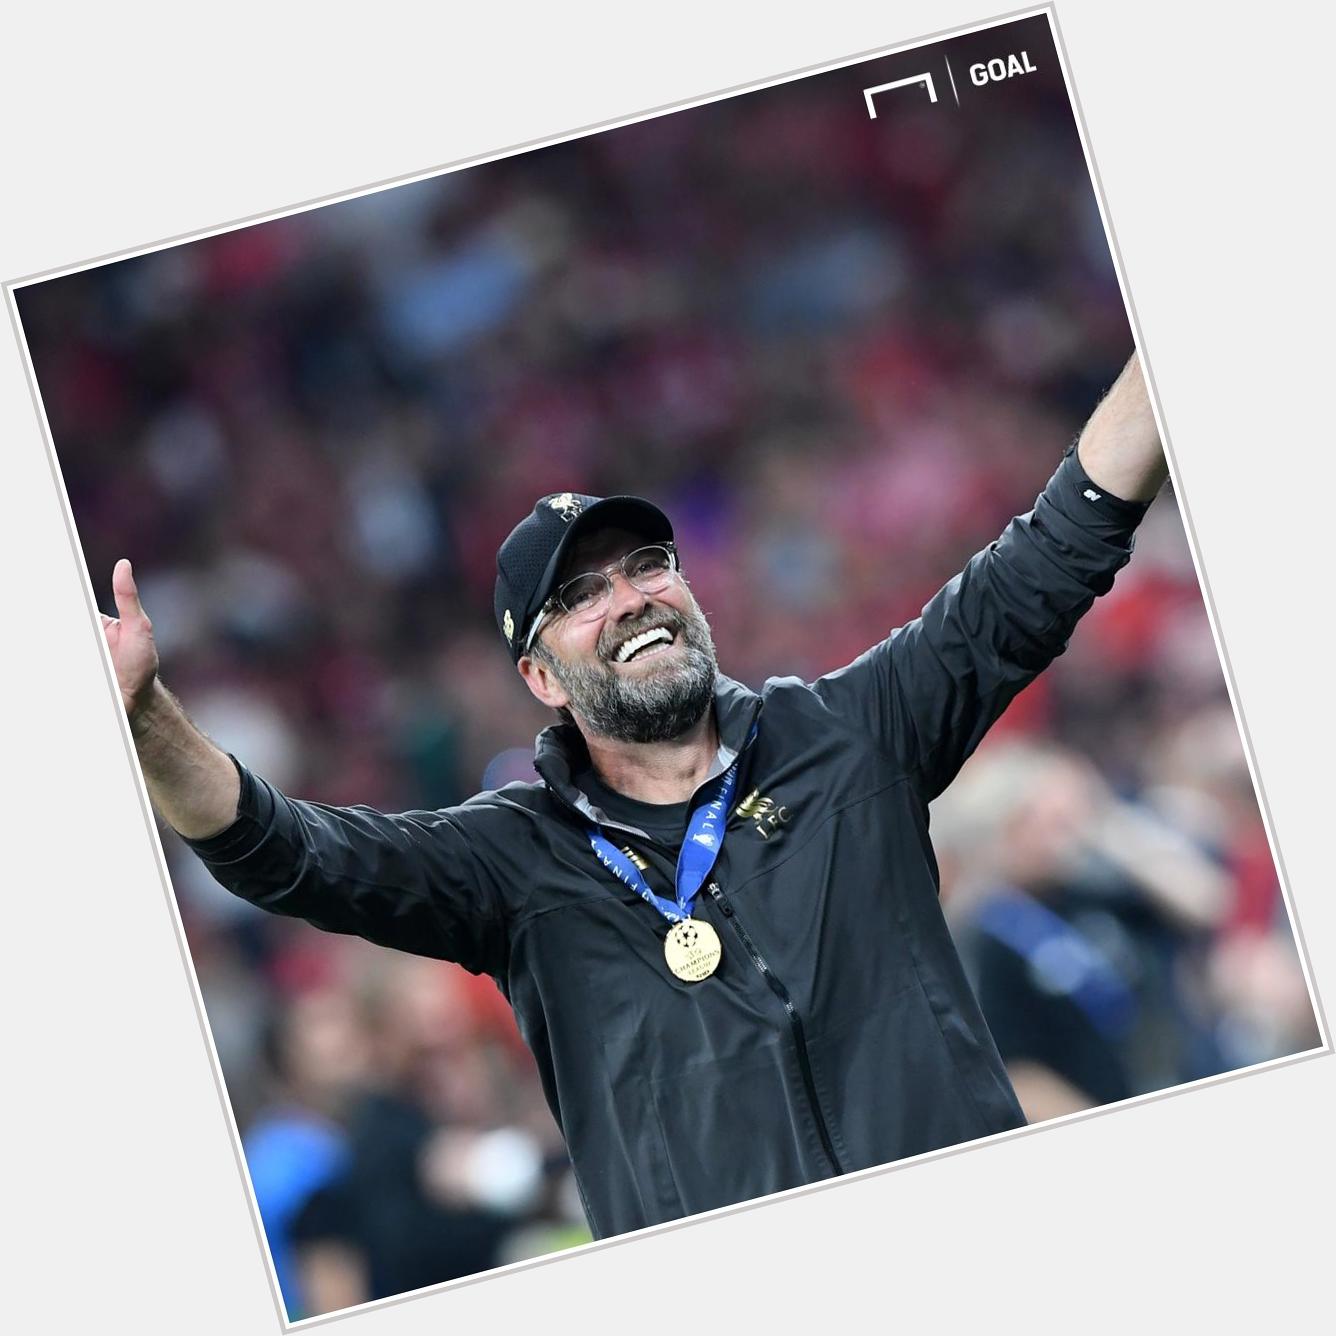 Happy 52nd birthday to Jurgen Klopp! What player would you get the Liverpool boss for his birthday? 